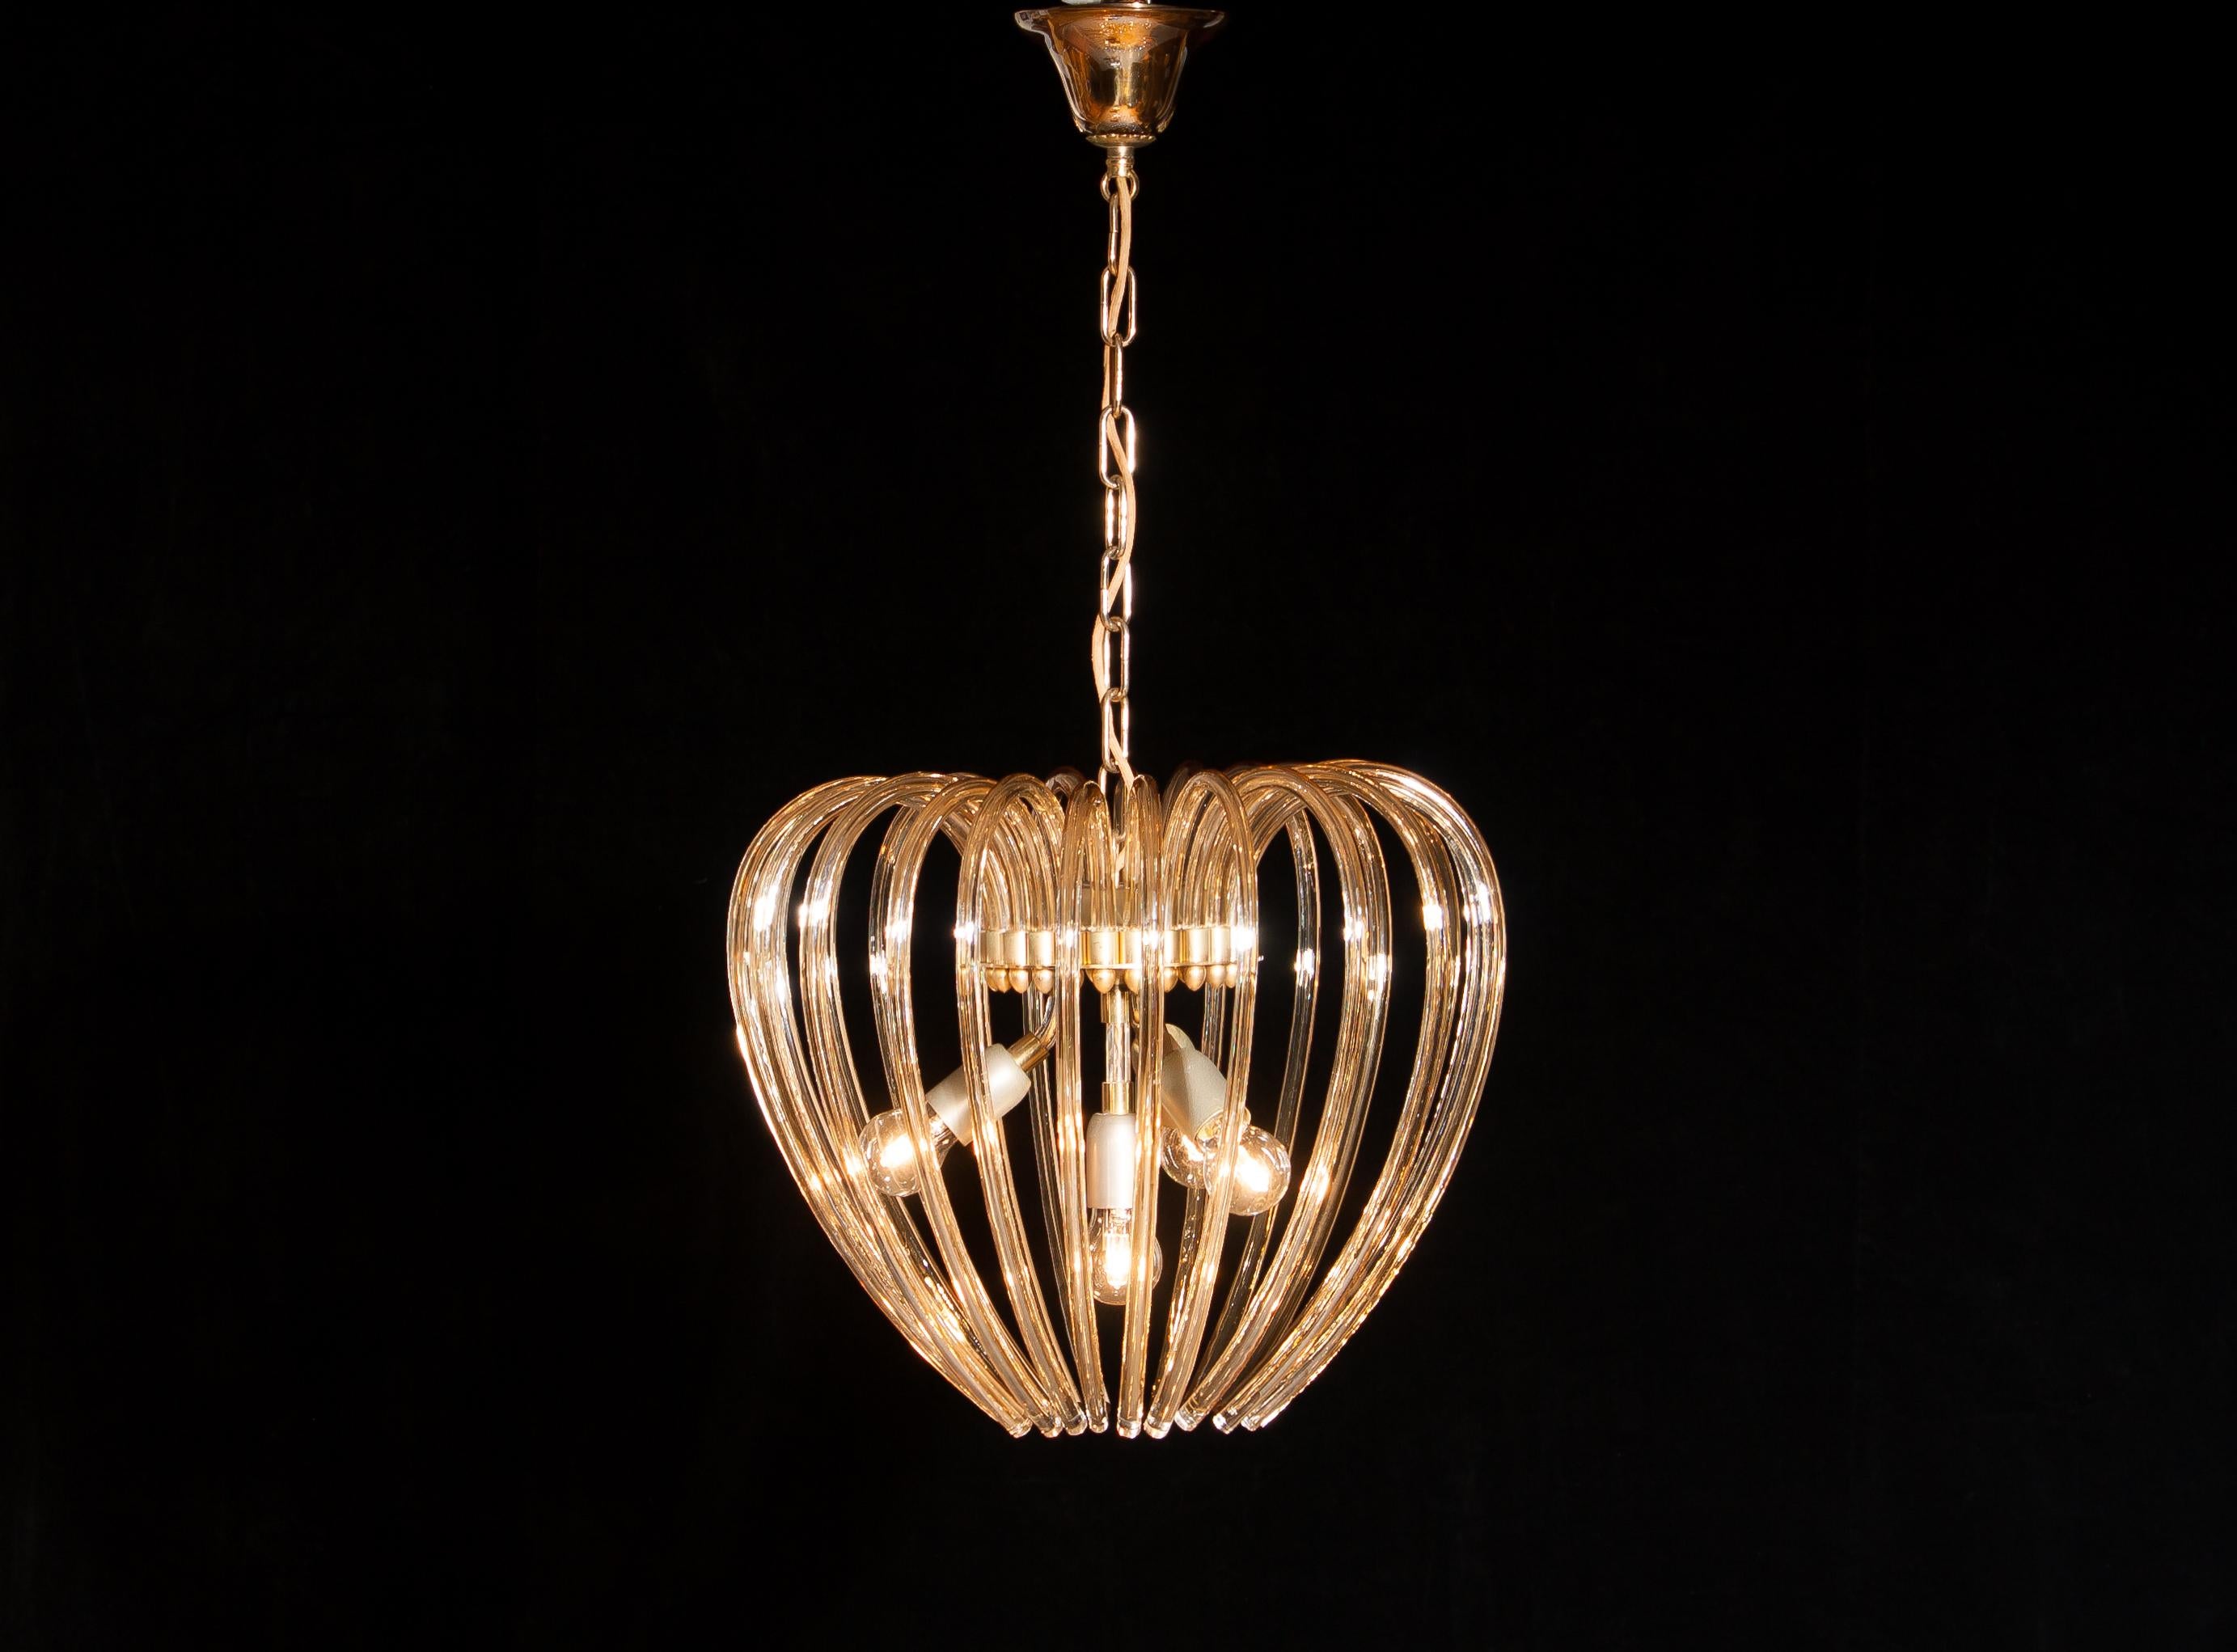 Lovely chandelier by Murano Italy.
This lamp has a beautiful heart shape made of gilded crystal elements.
It is in an excellent condition.
Period 1960s.
Dimension: Total height 90cm, ø.50 cm.